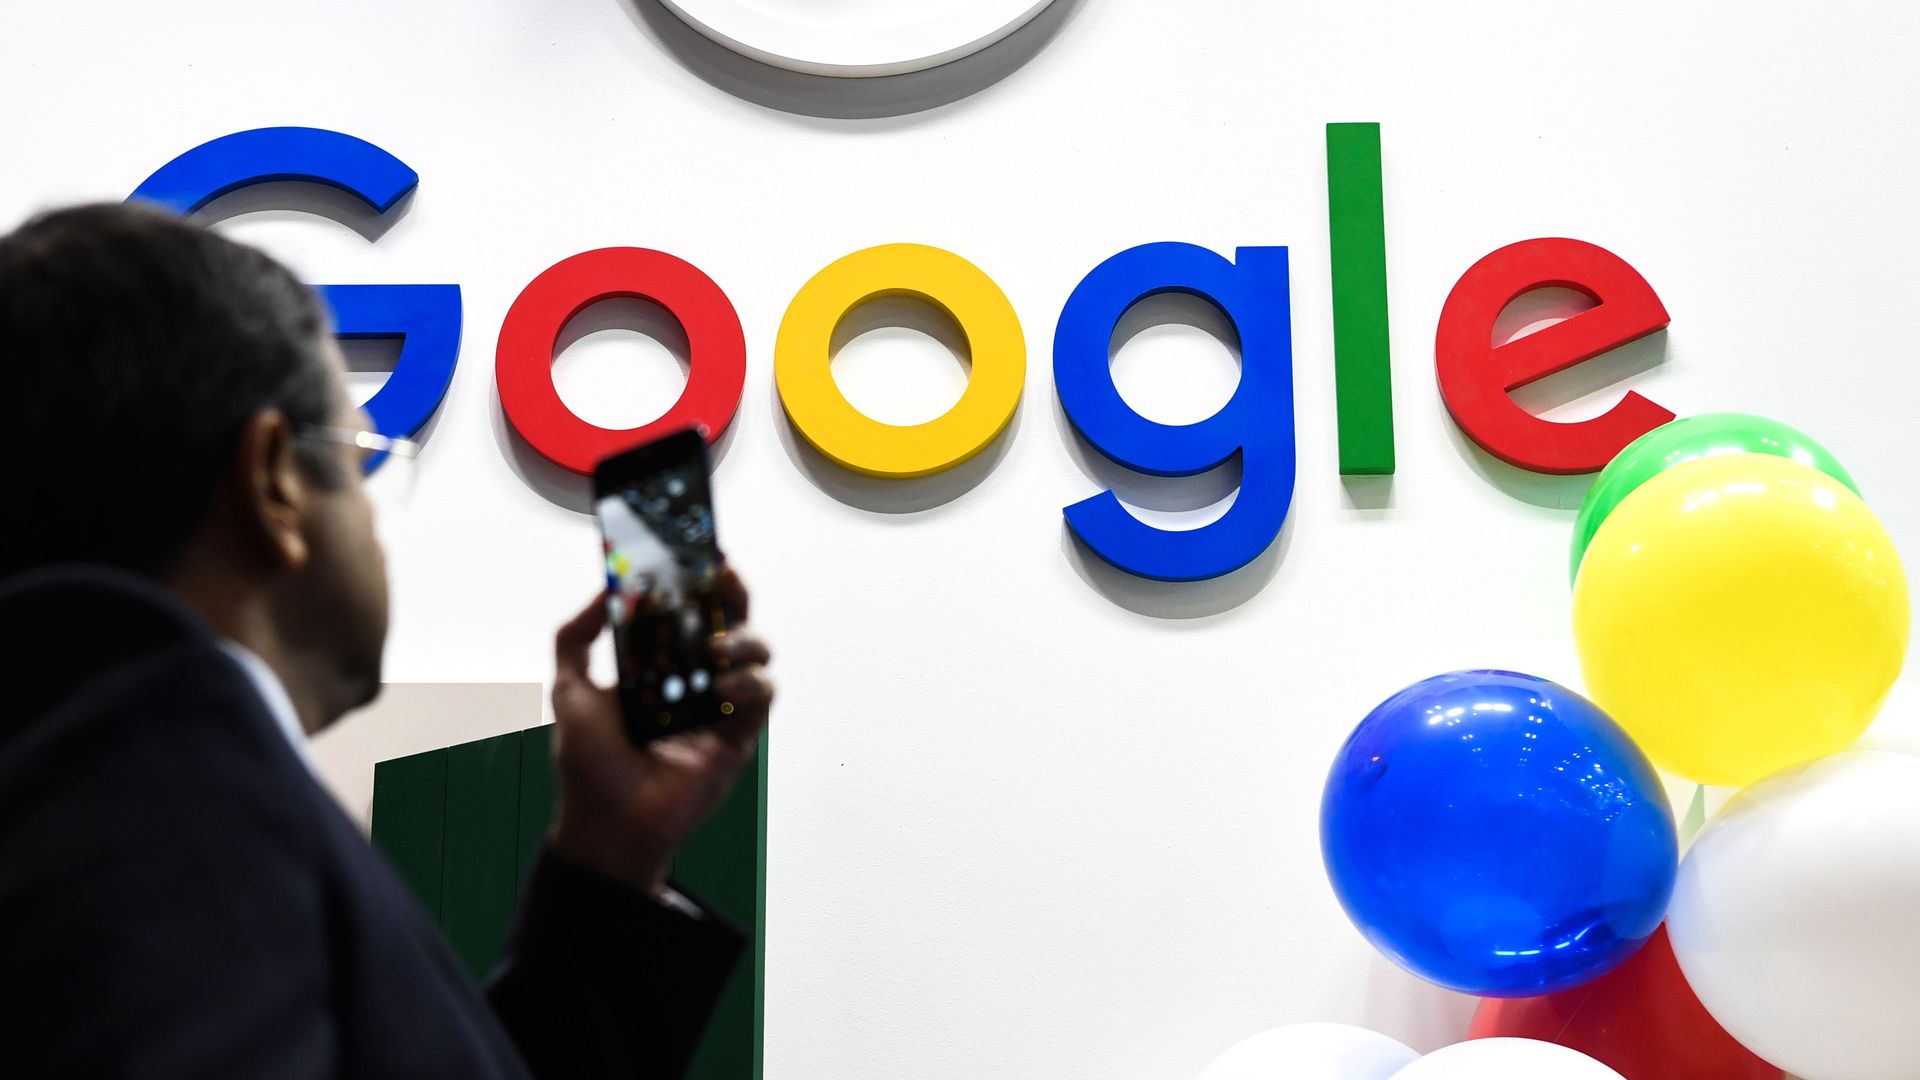 In this image, a man takes a picture of the Google logo as balloons float nearby.